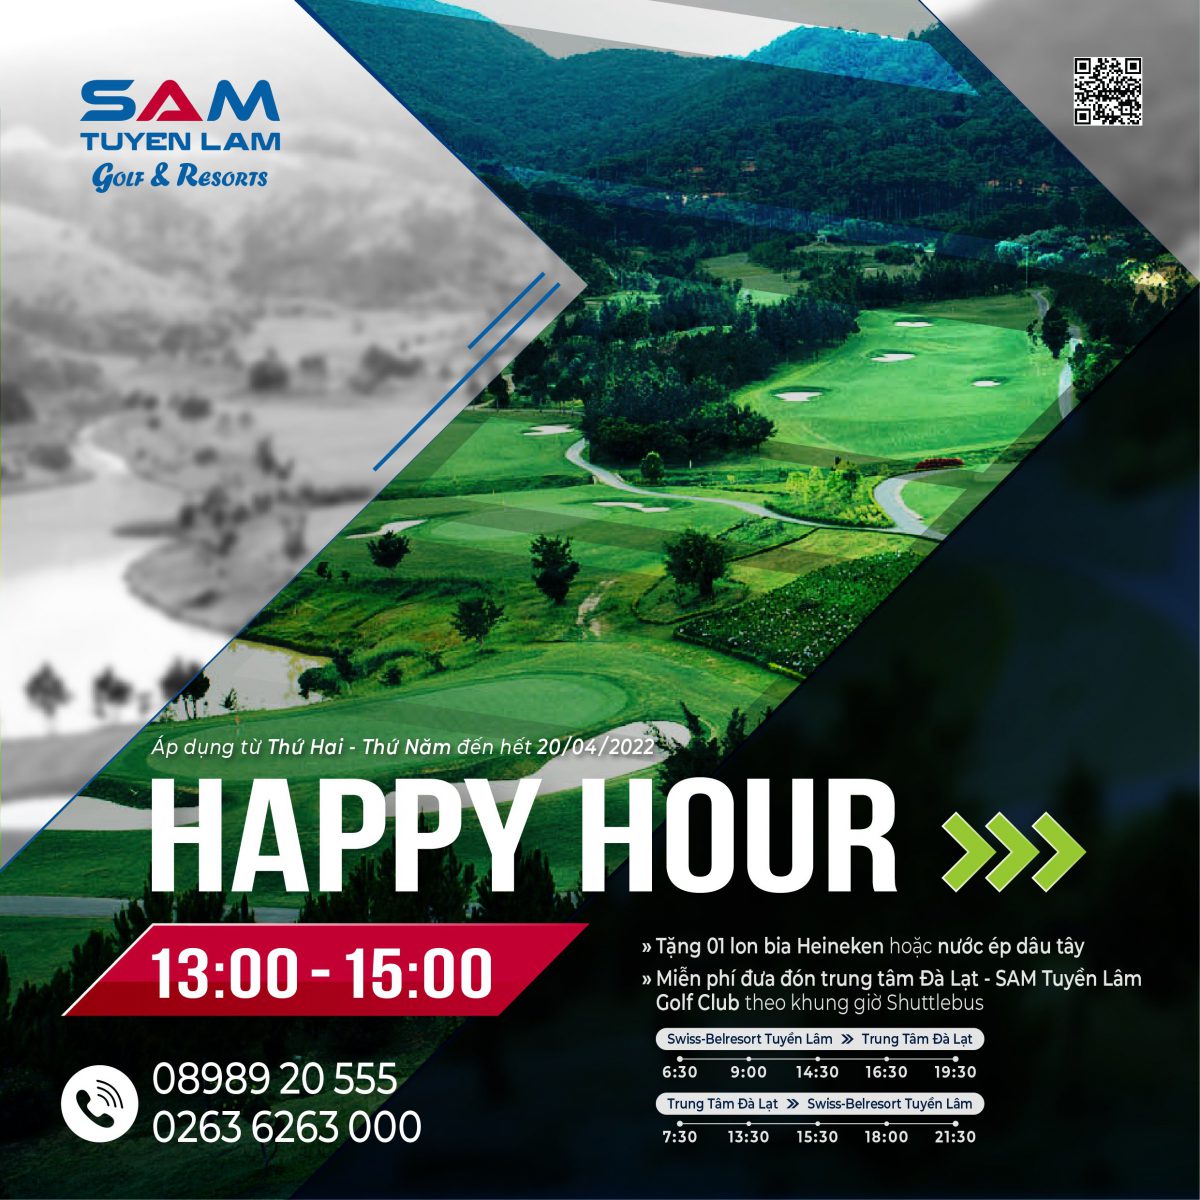 HAPPY HOUR – HAPPY GOLF TIME